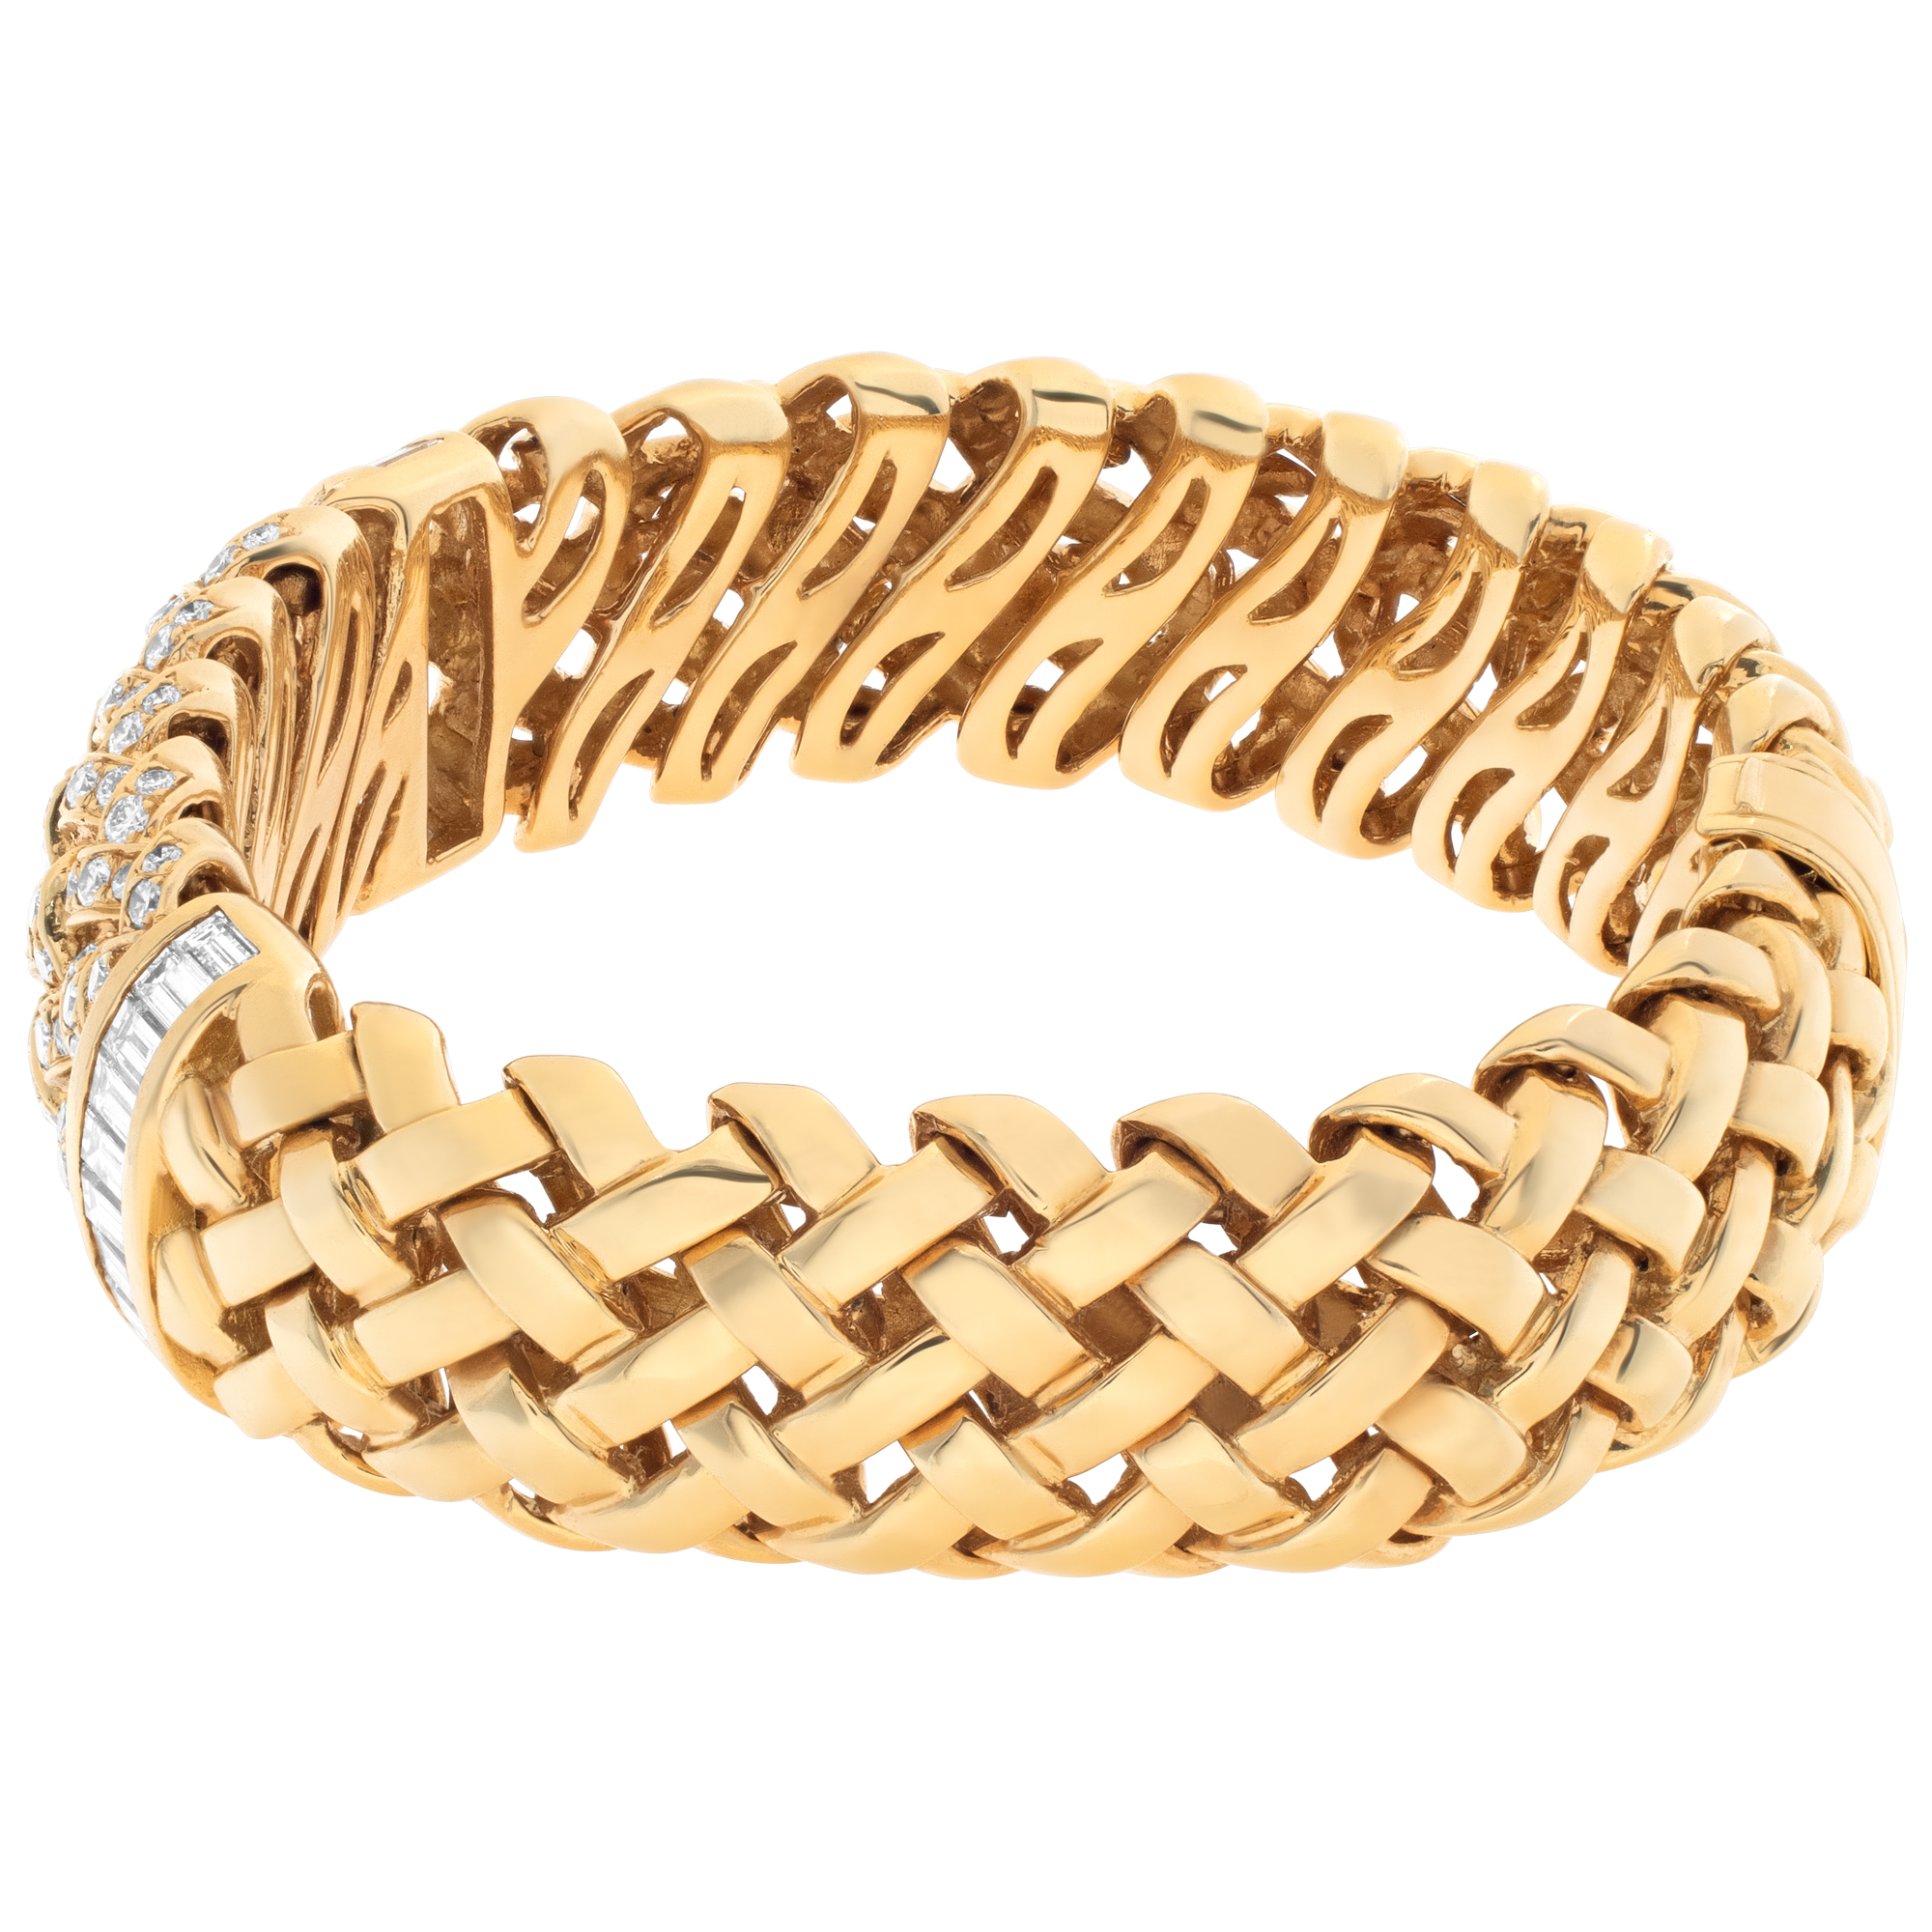 Tiffany & Co. VANNERIE Collection bracelet in 18K yellow gold image 3